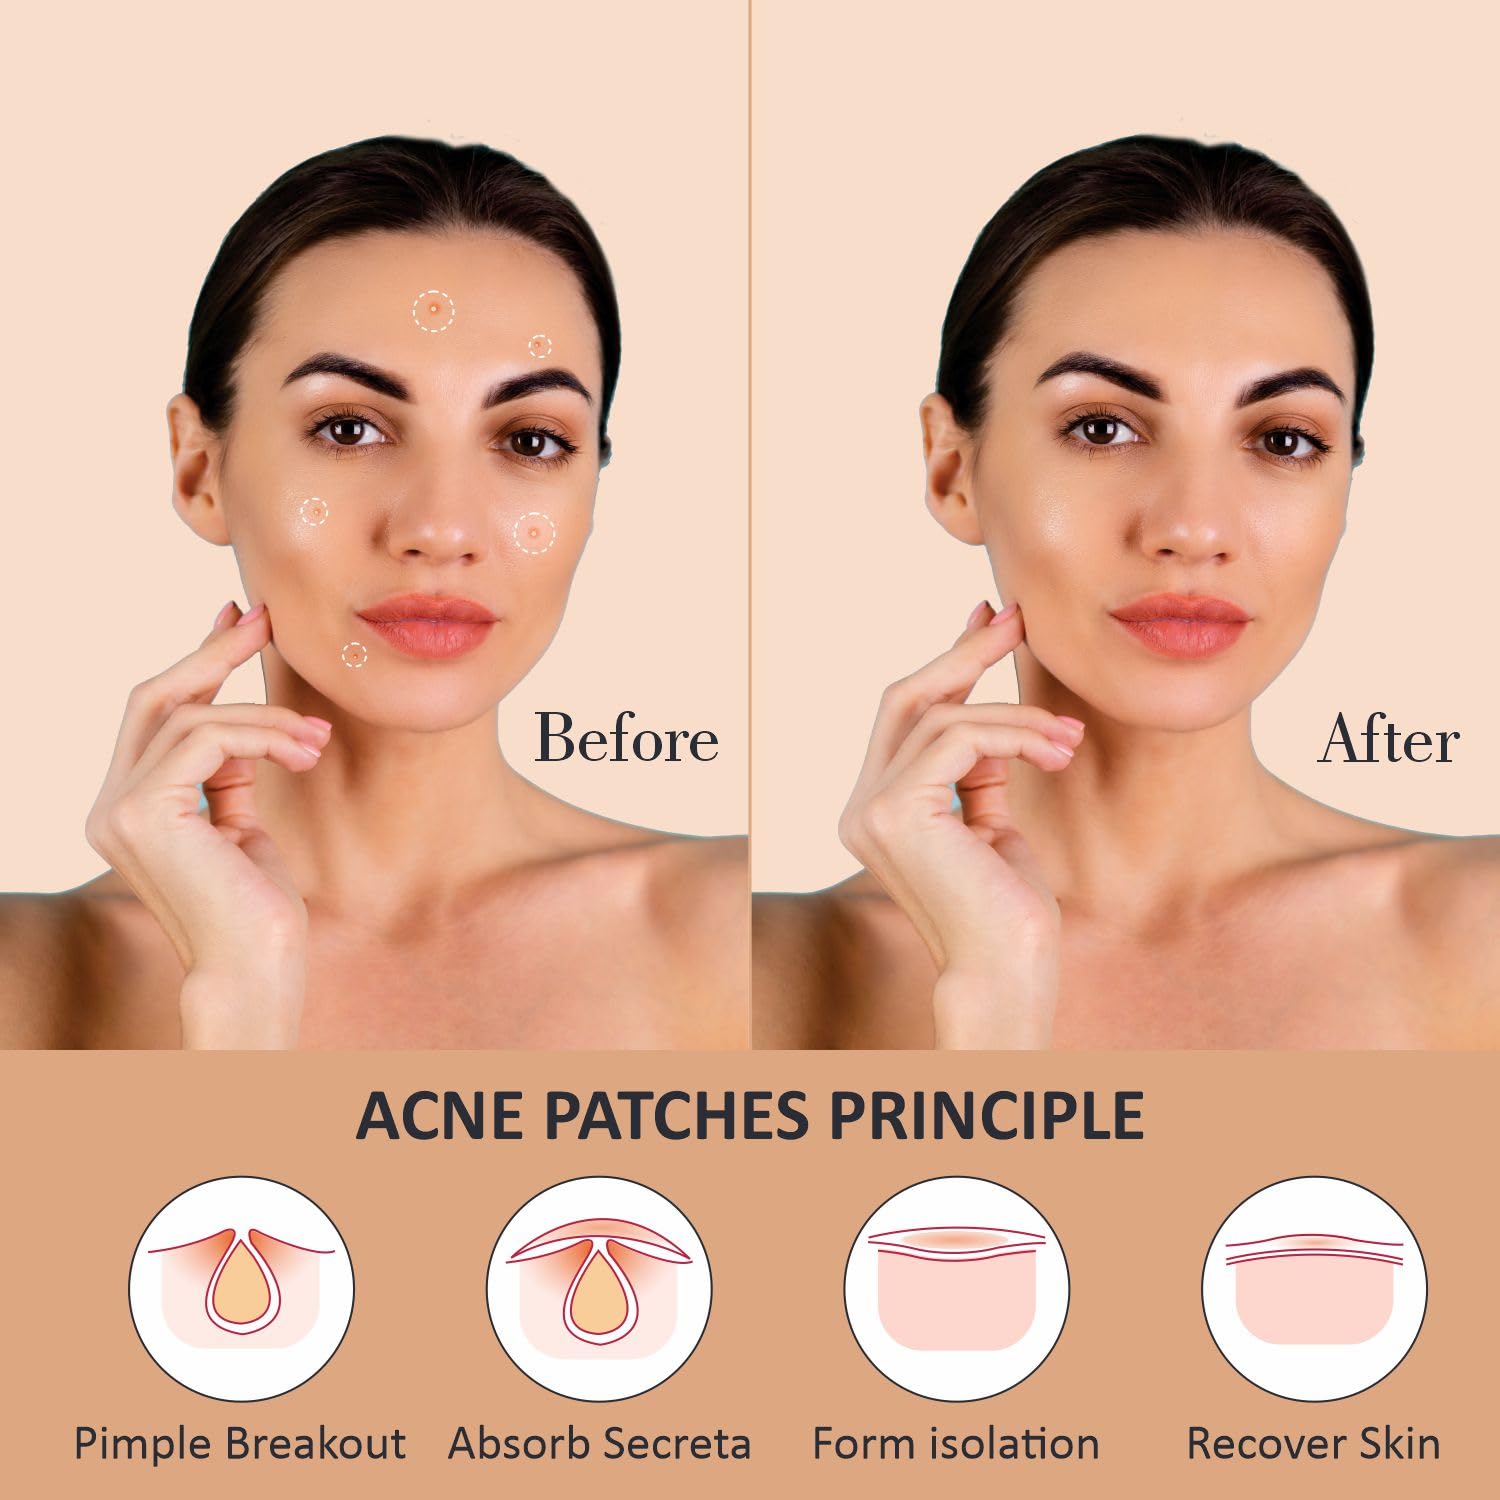 Rejusure Acne Patch | Waterproof Patches | Absorbs Pimple Overnight, Reduces Excess Oil | Acne Korean Spot Patch for Covering Zits and Blemishes | For All Skin Types | Men & Women (Pack of 1)